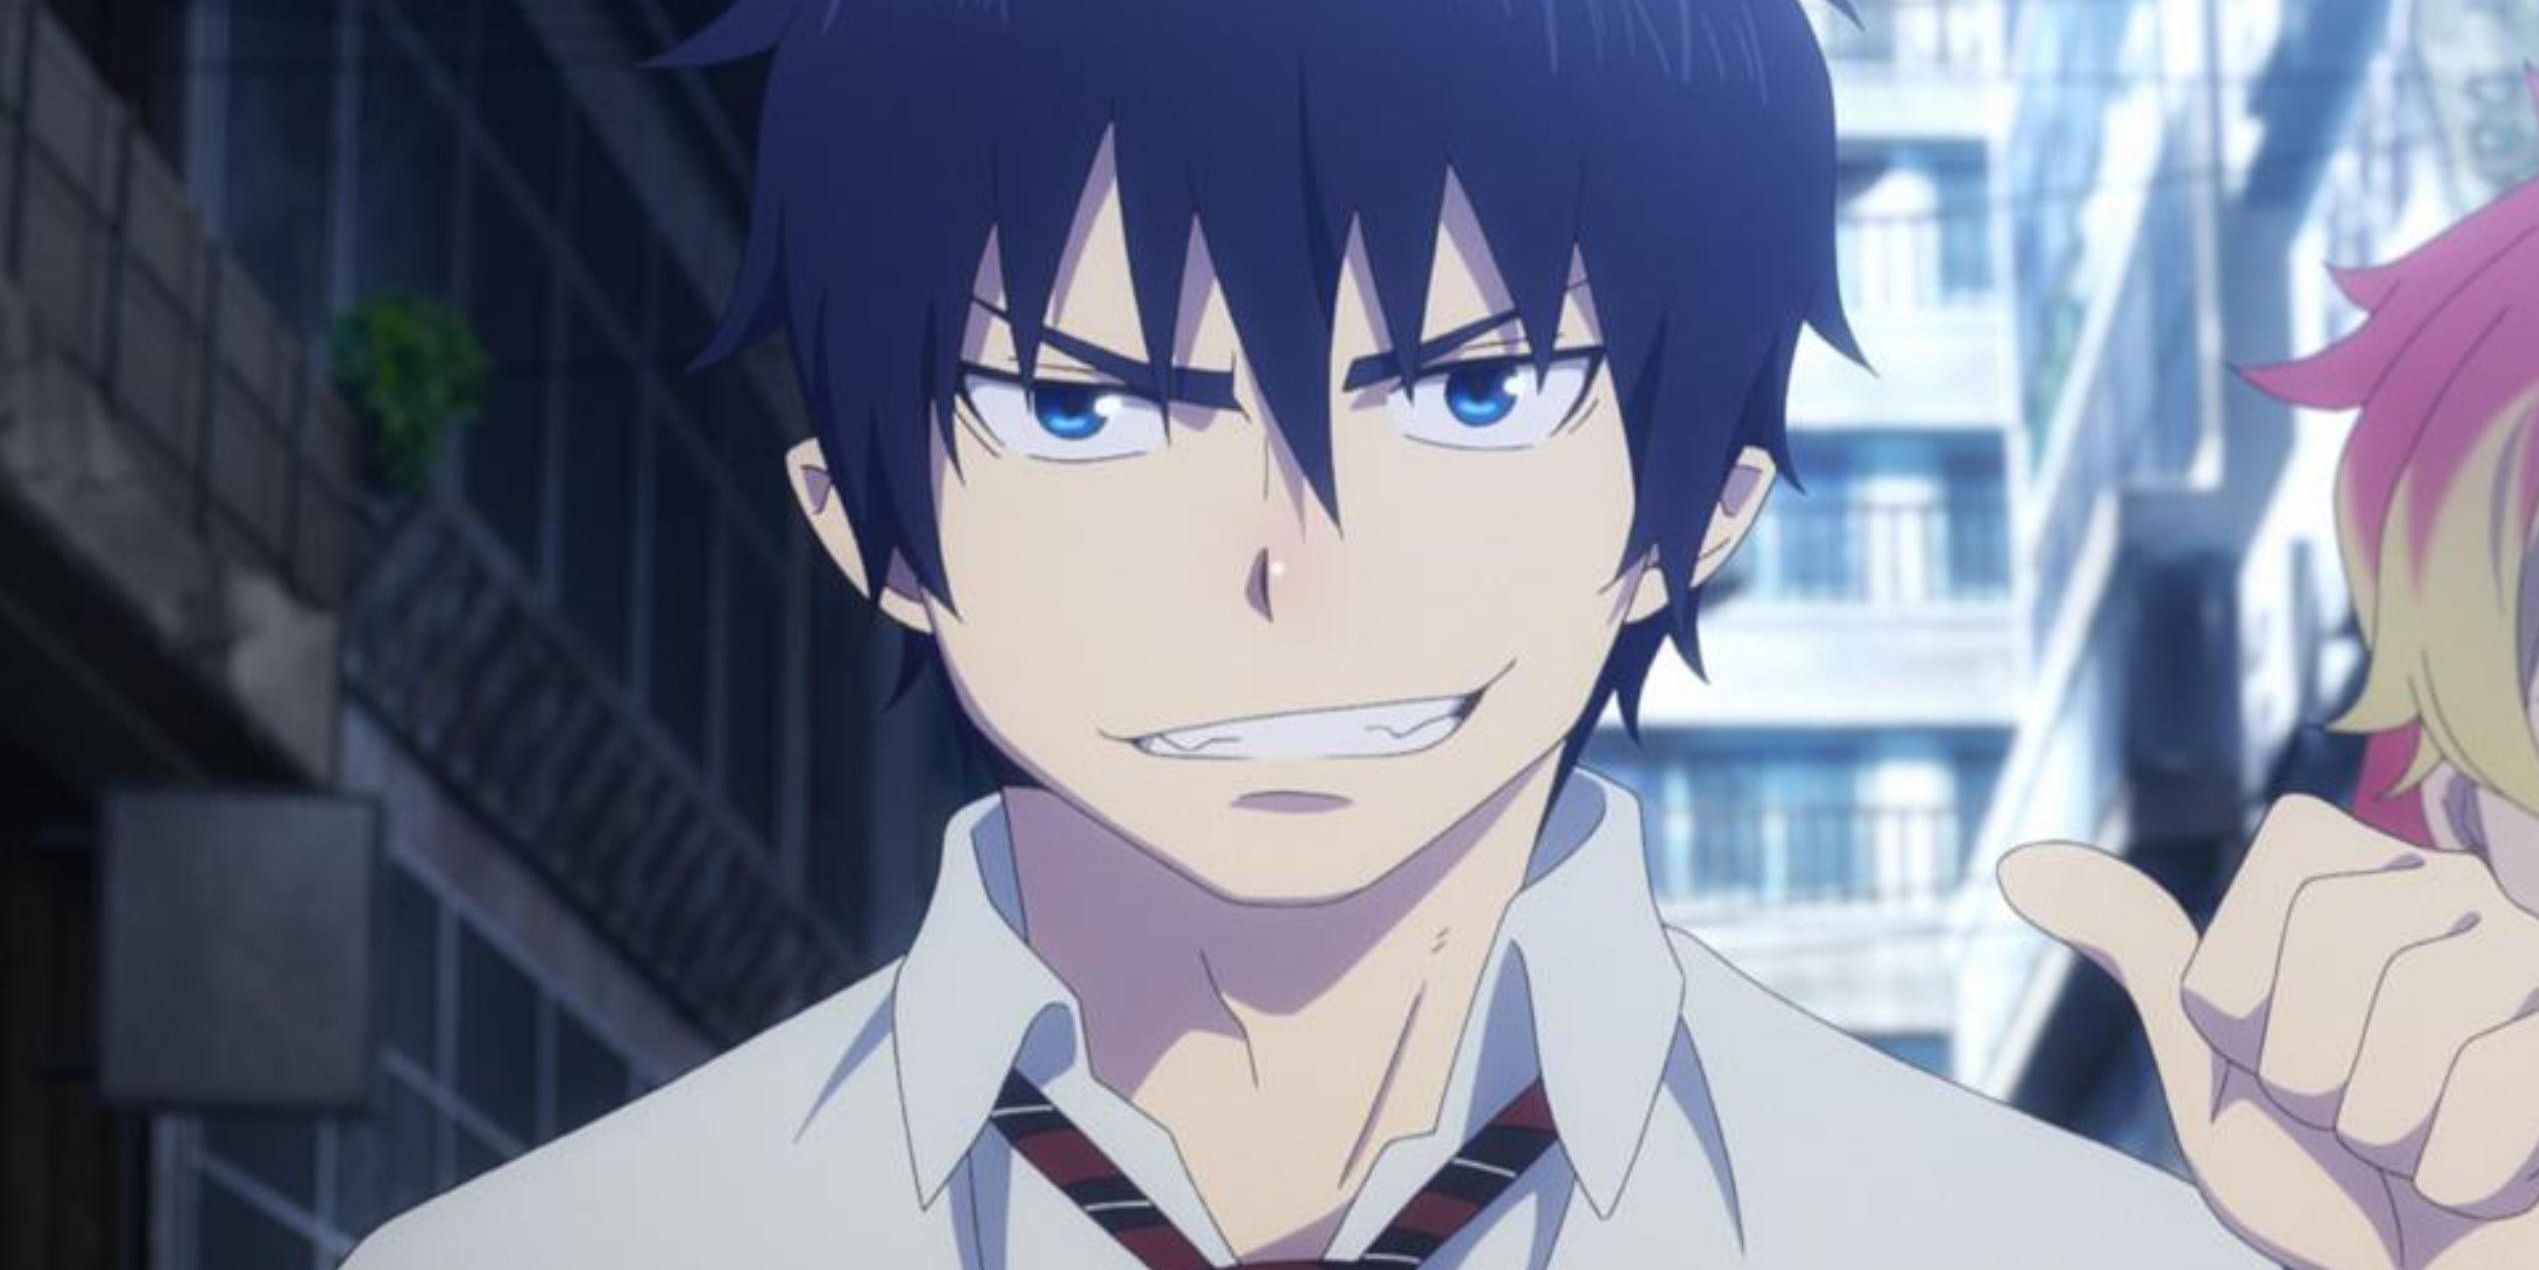 5. Rin Was Given A New Identity To Conceal His Parentage In Blue Exorcist. 